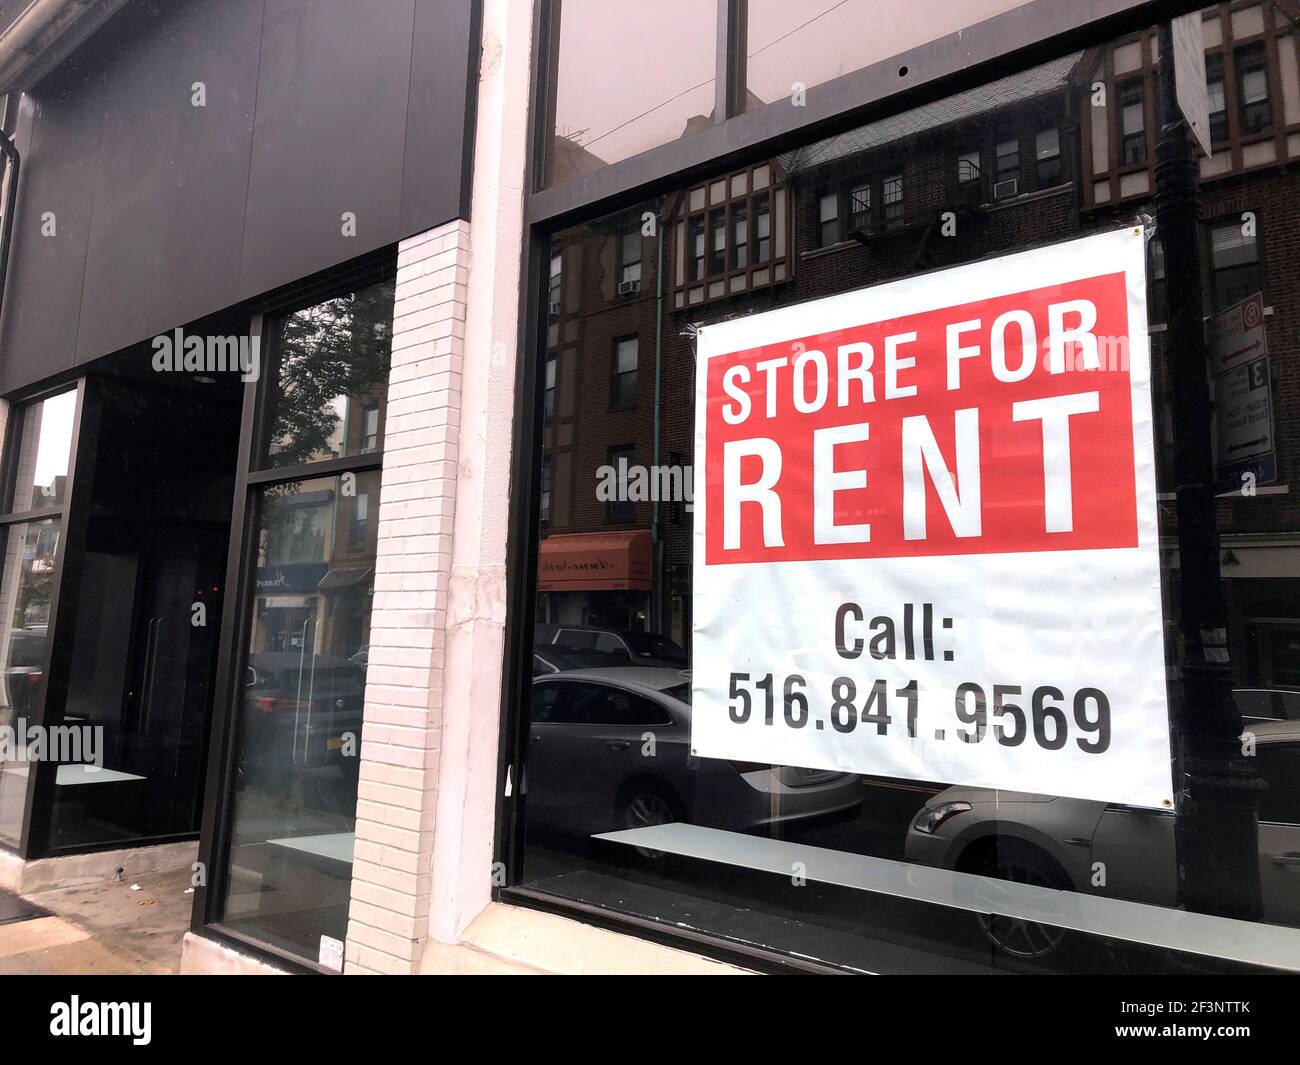 Store for Rent sign, due to Coronavirus Pandemic shutdown and loss of business, Queens, New York Stock Photo